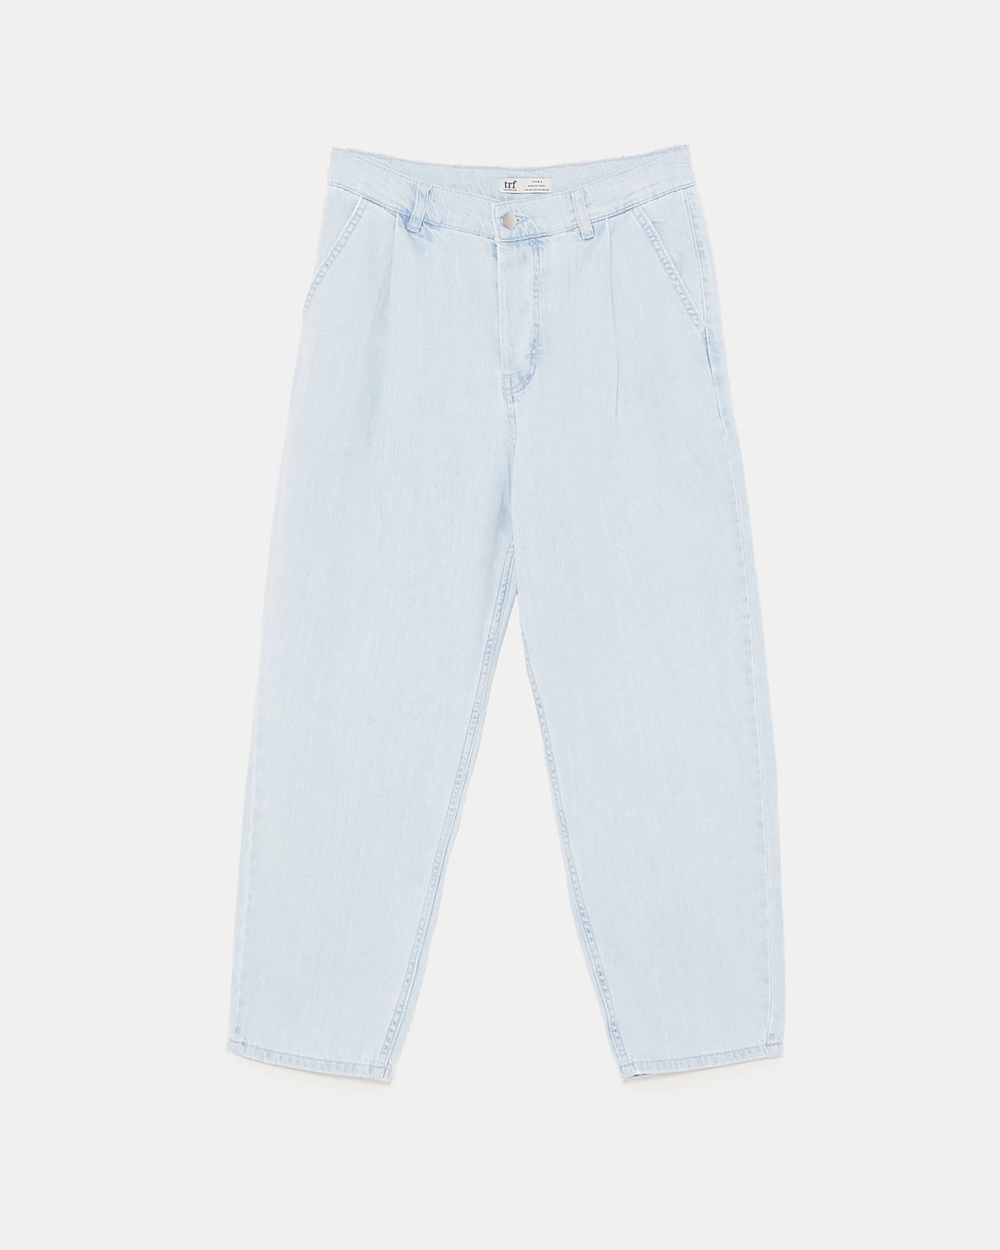 Darted jeans, from $70 from Zara